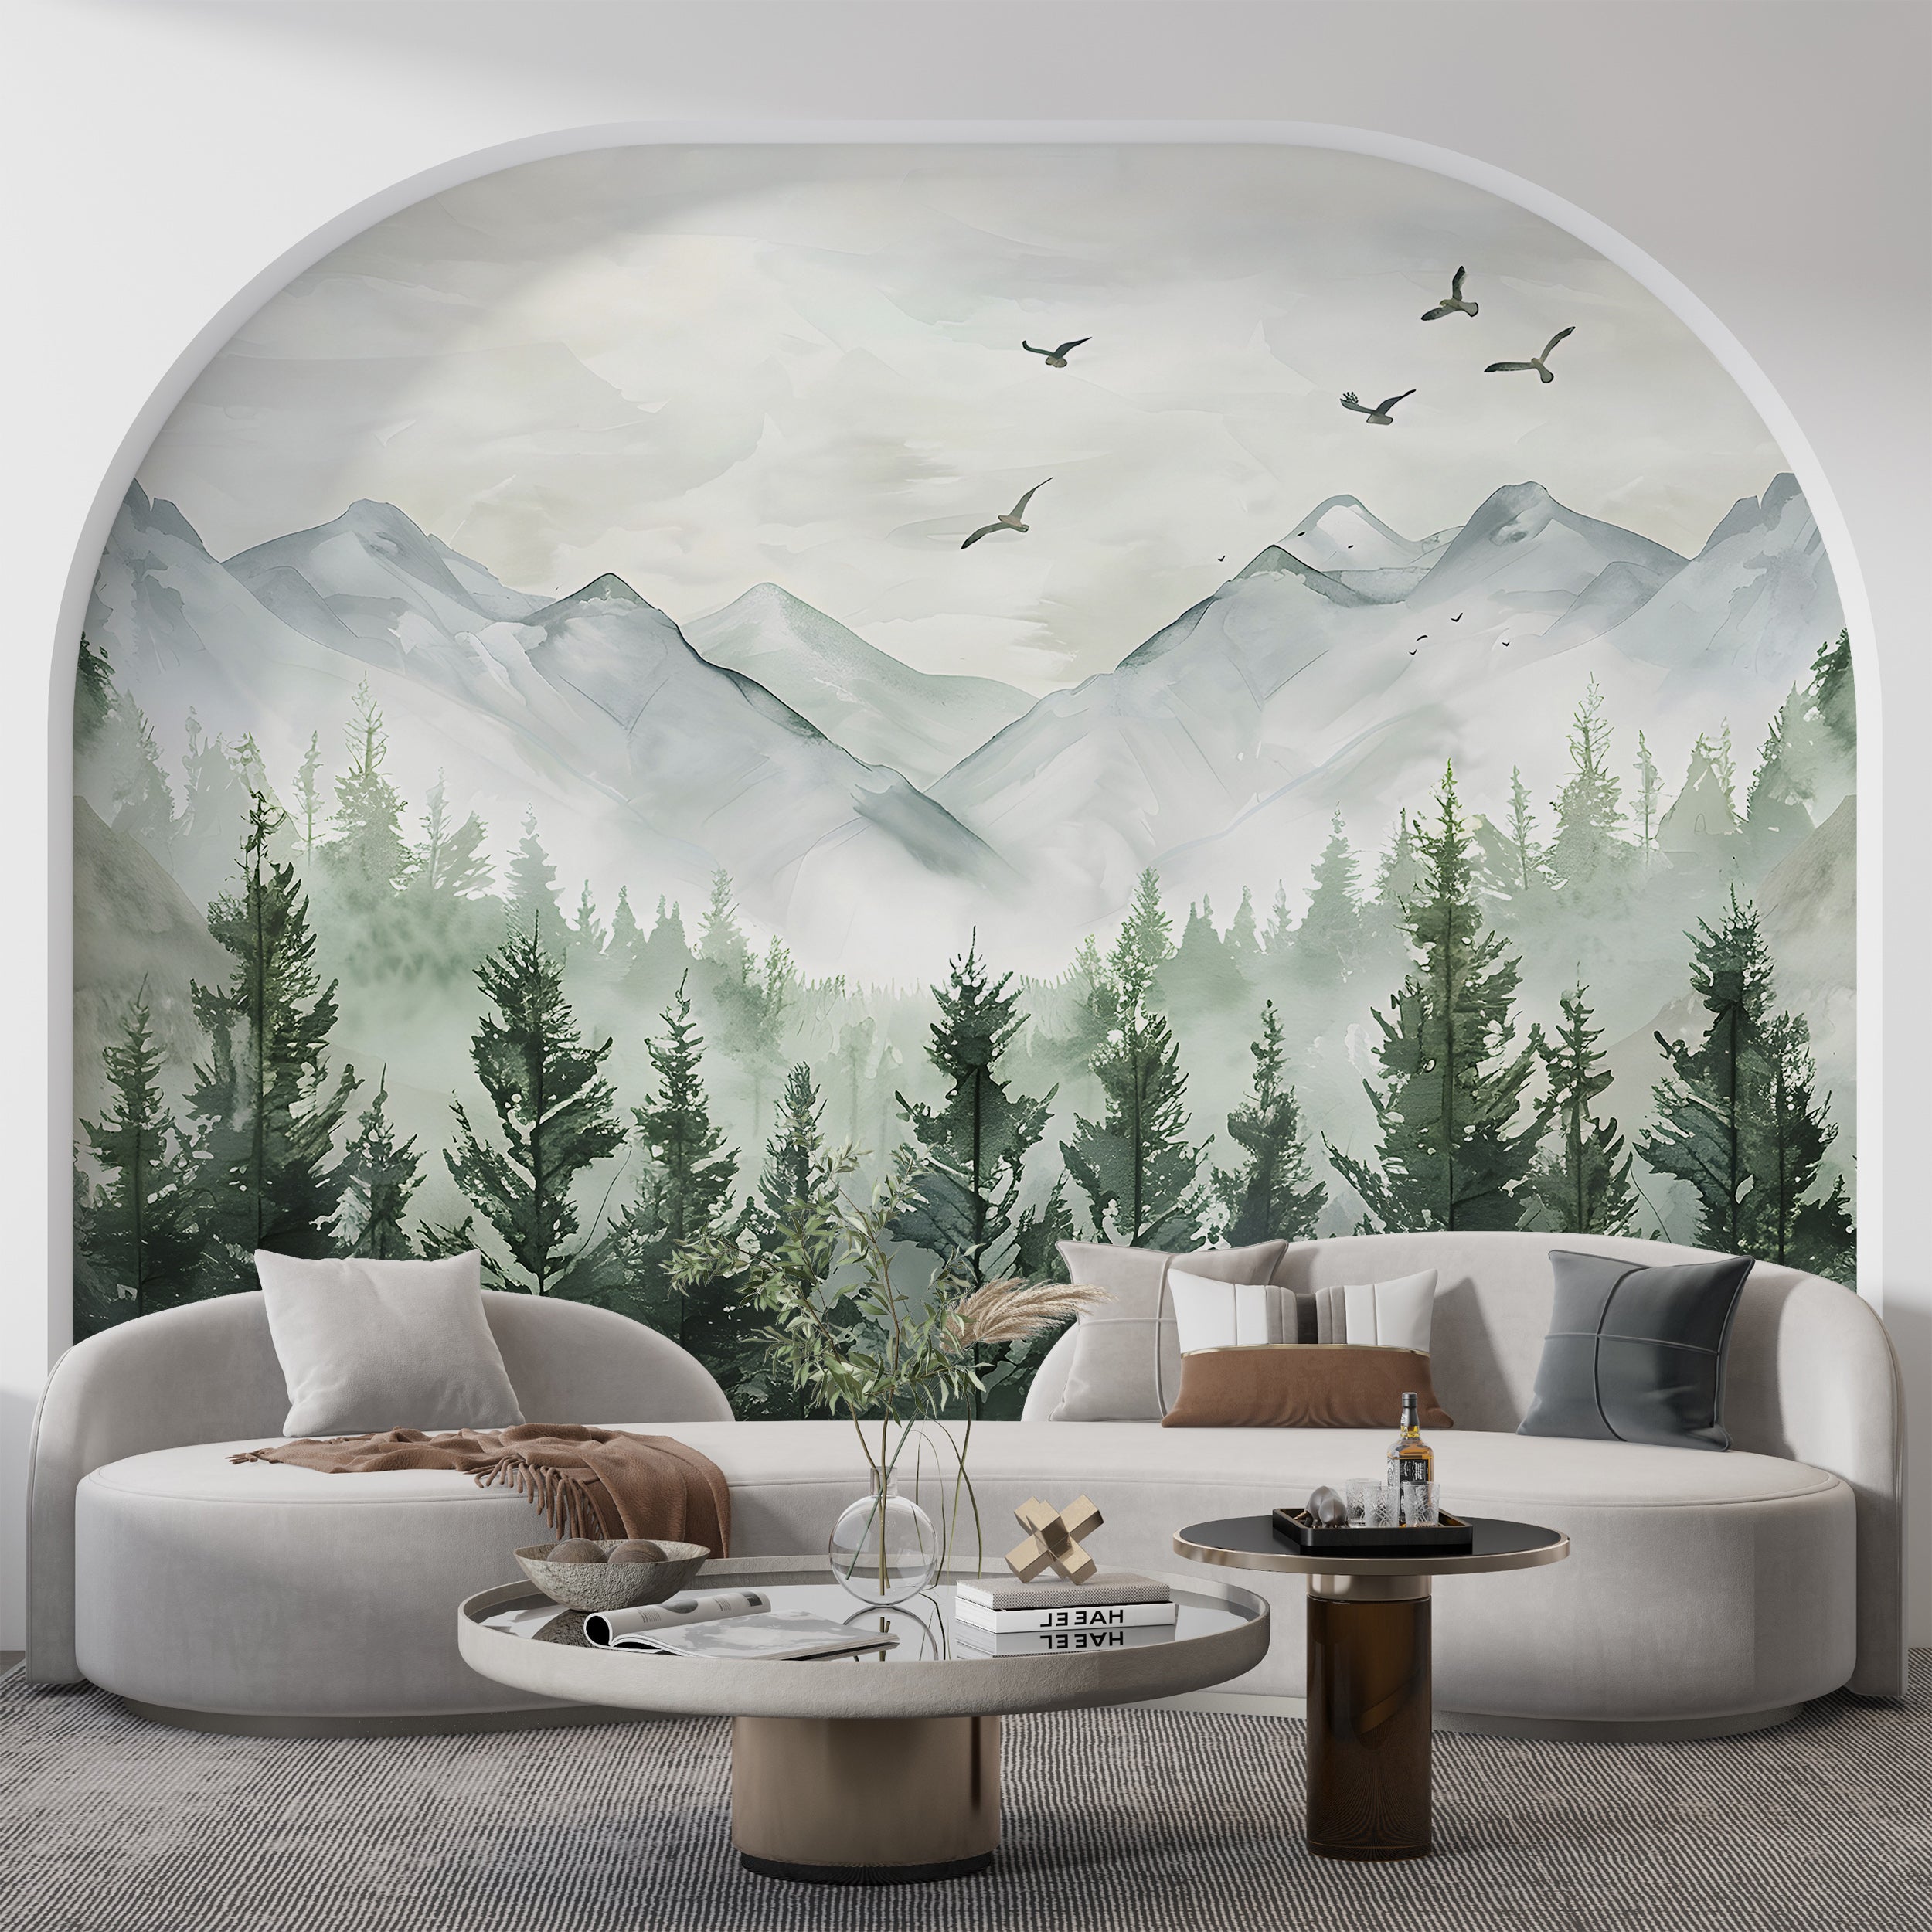 Minimalistic Mountains Mural, Watercolor Forest and Mountain Landscape Wallpaper, Removable Pastel Colors Nature Wall Decor